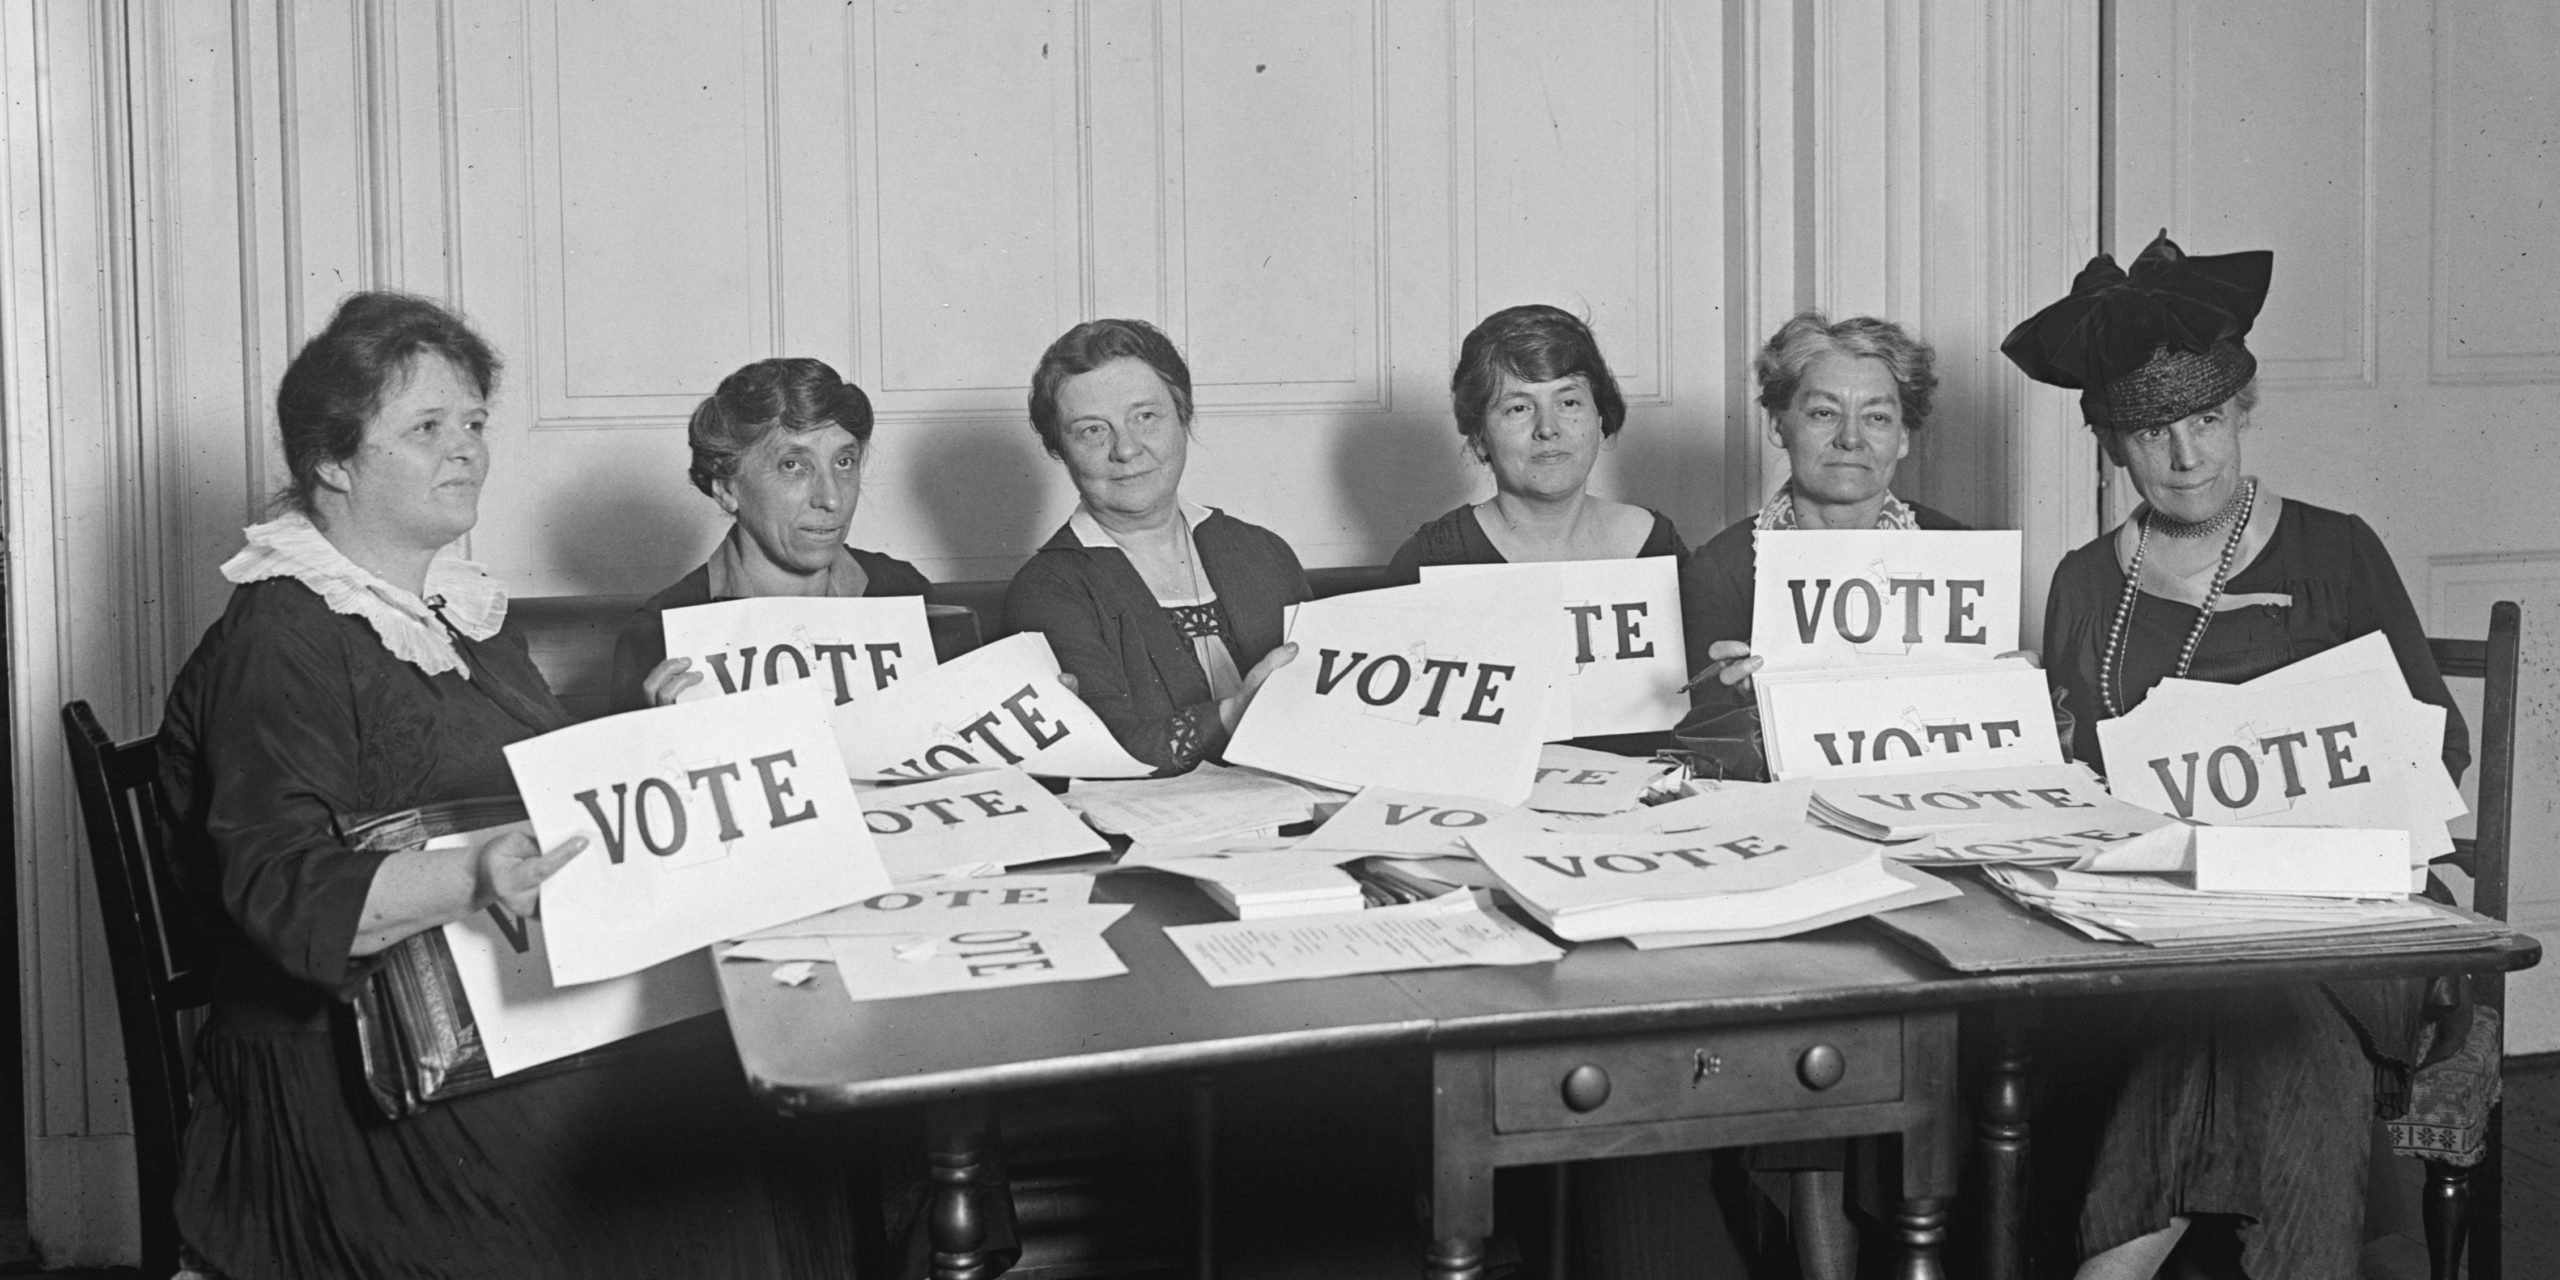 Voting is Sexy: On Setting a Romance Novel Amidst the Suffrage Movement